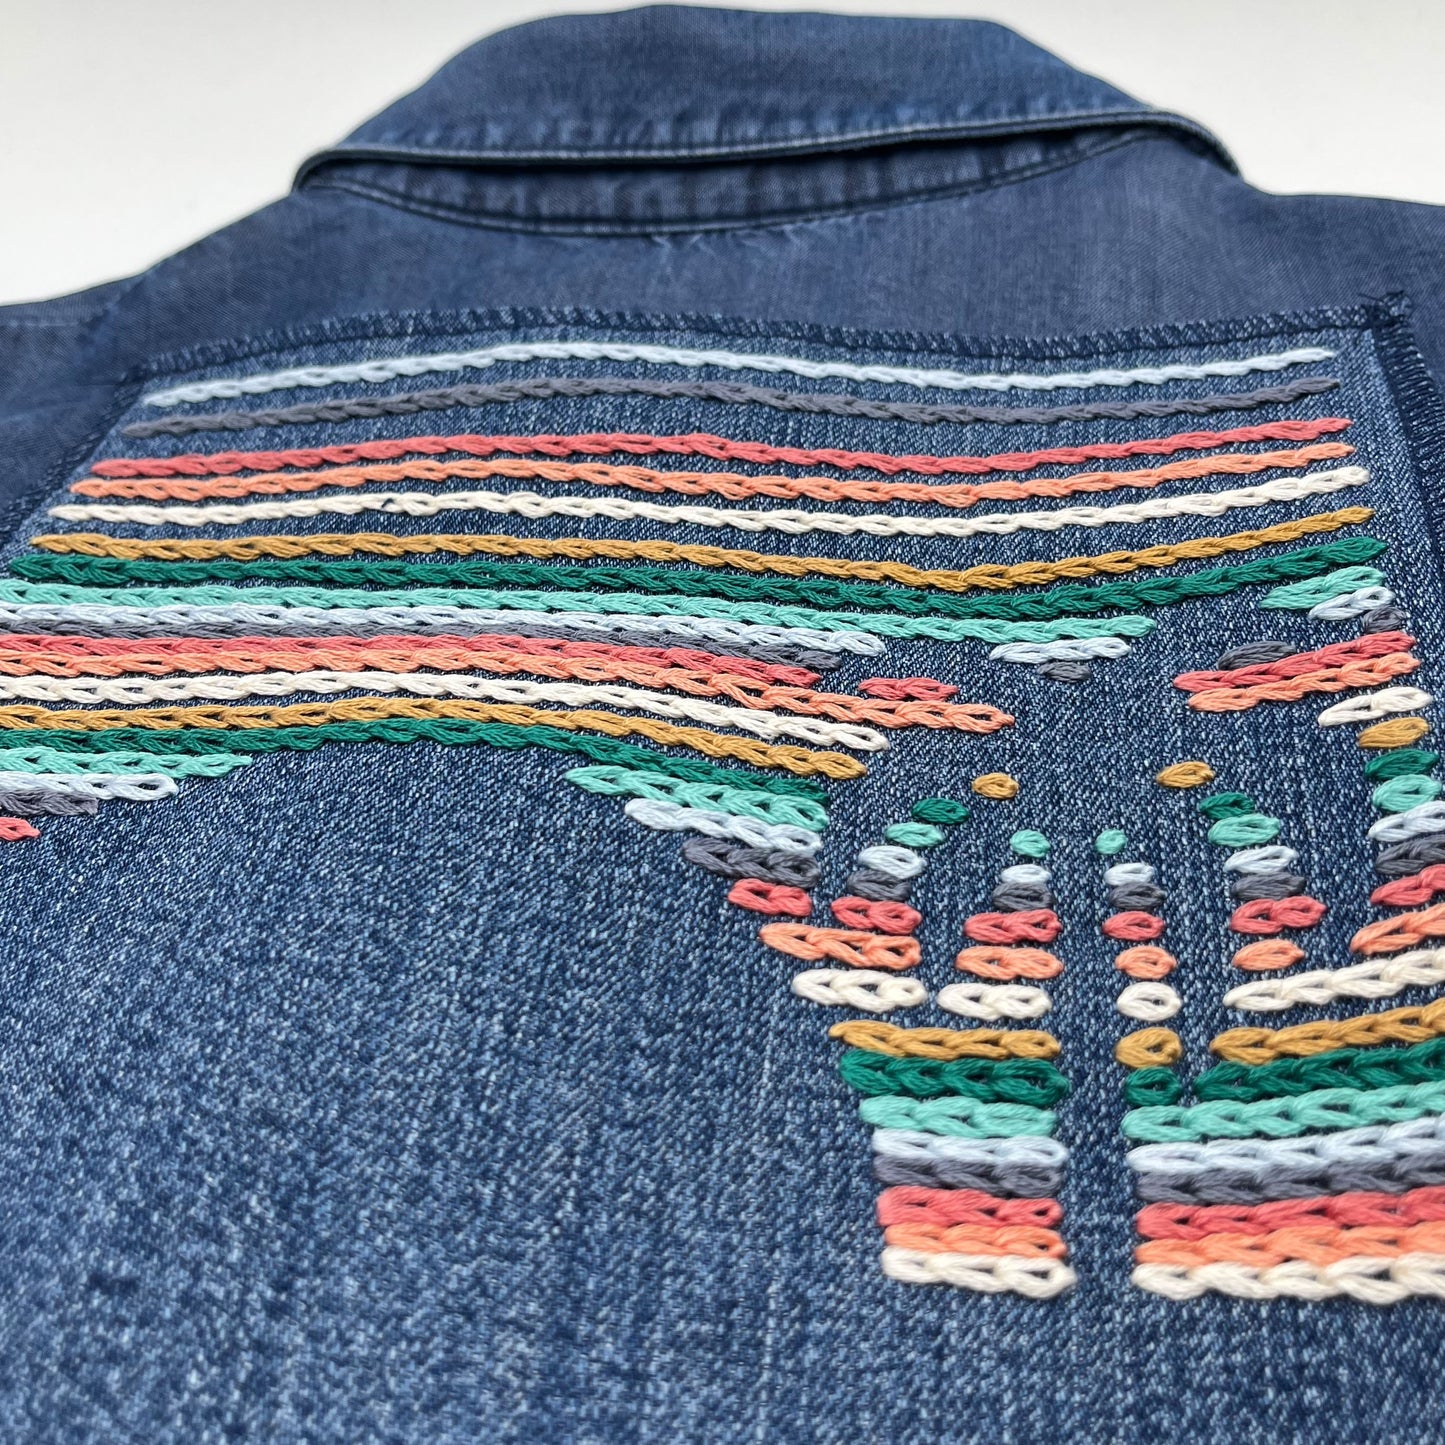 a large square denim patch, hand stitched with rows of chainstitch, with negative space showing the shapes of a palm tree next to a setting sun, with peach, coral, grey, light blue, seafoam green and mustard colored thread, on the back of a denim top